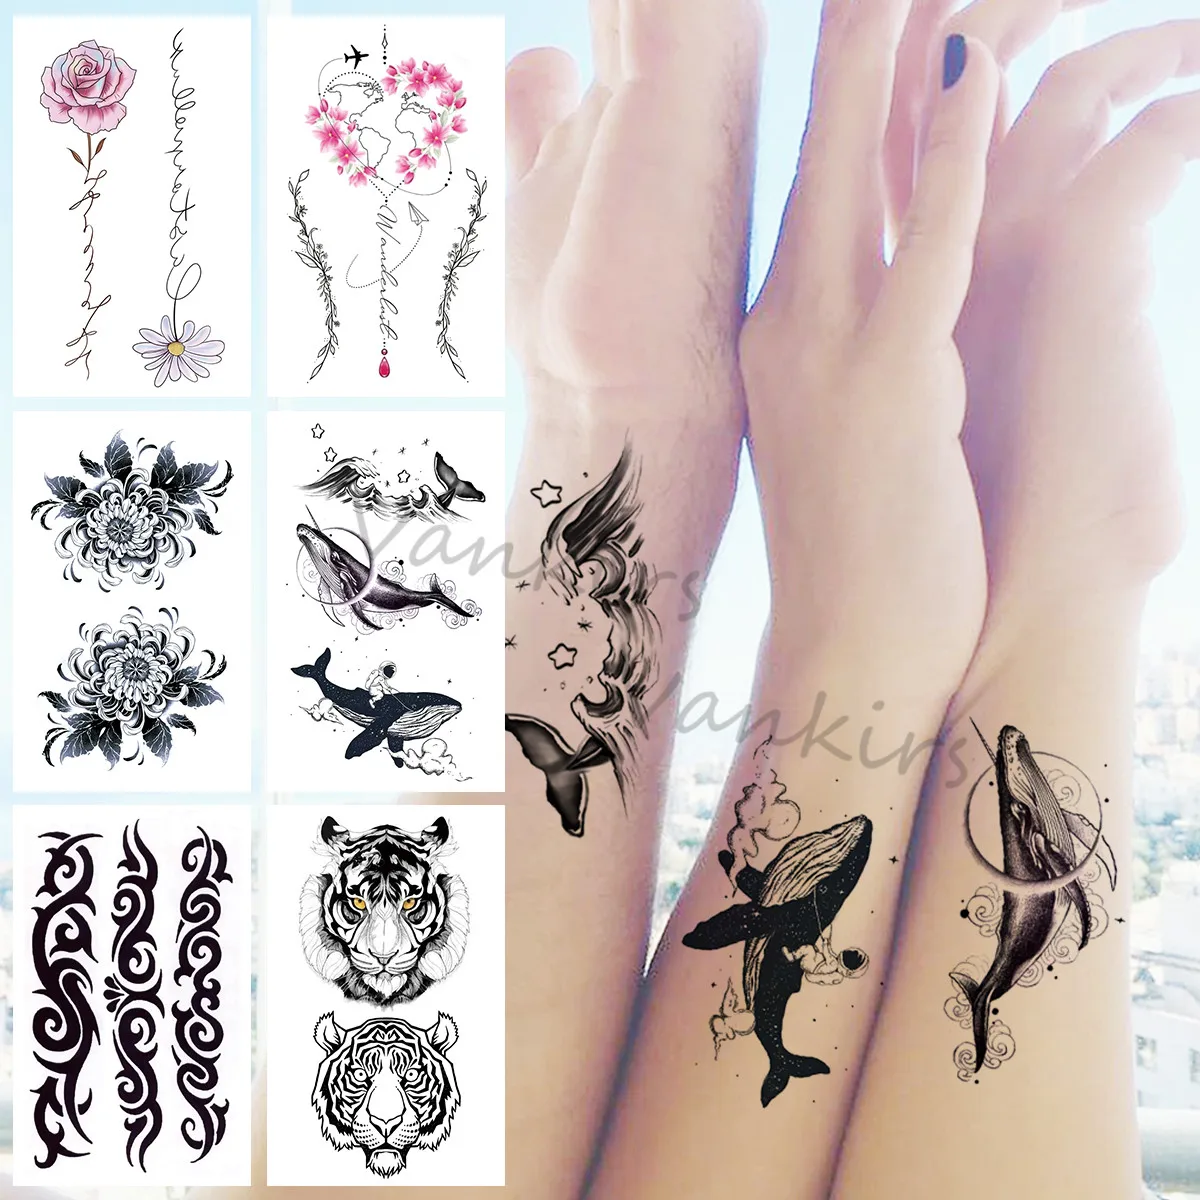 

3D Black Whale Temporary Tattoos For Women Men Kids Realistic Daisy Tiger Watercolor Rose Flower Fake Tattoo Sticker Arm Tatoos